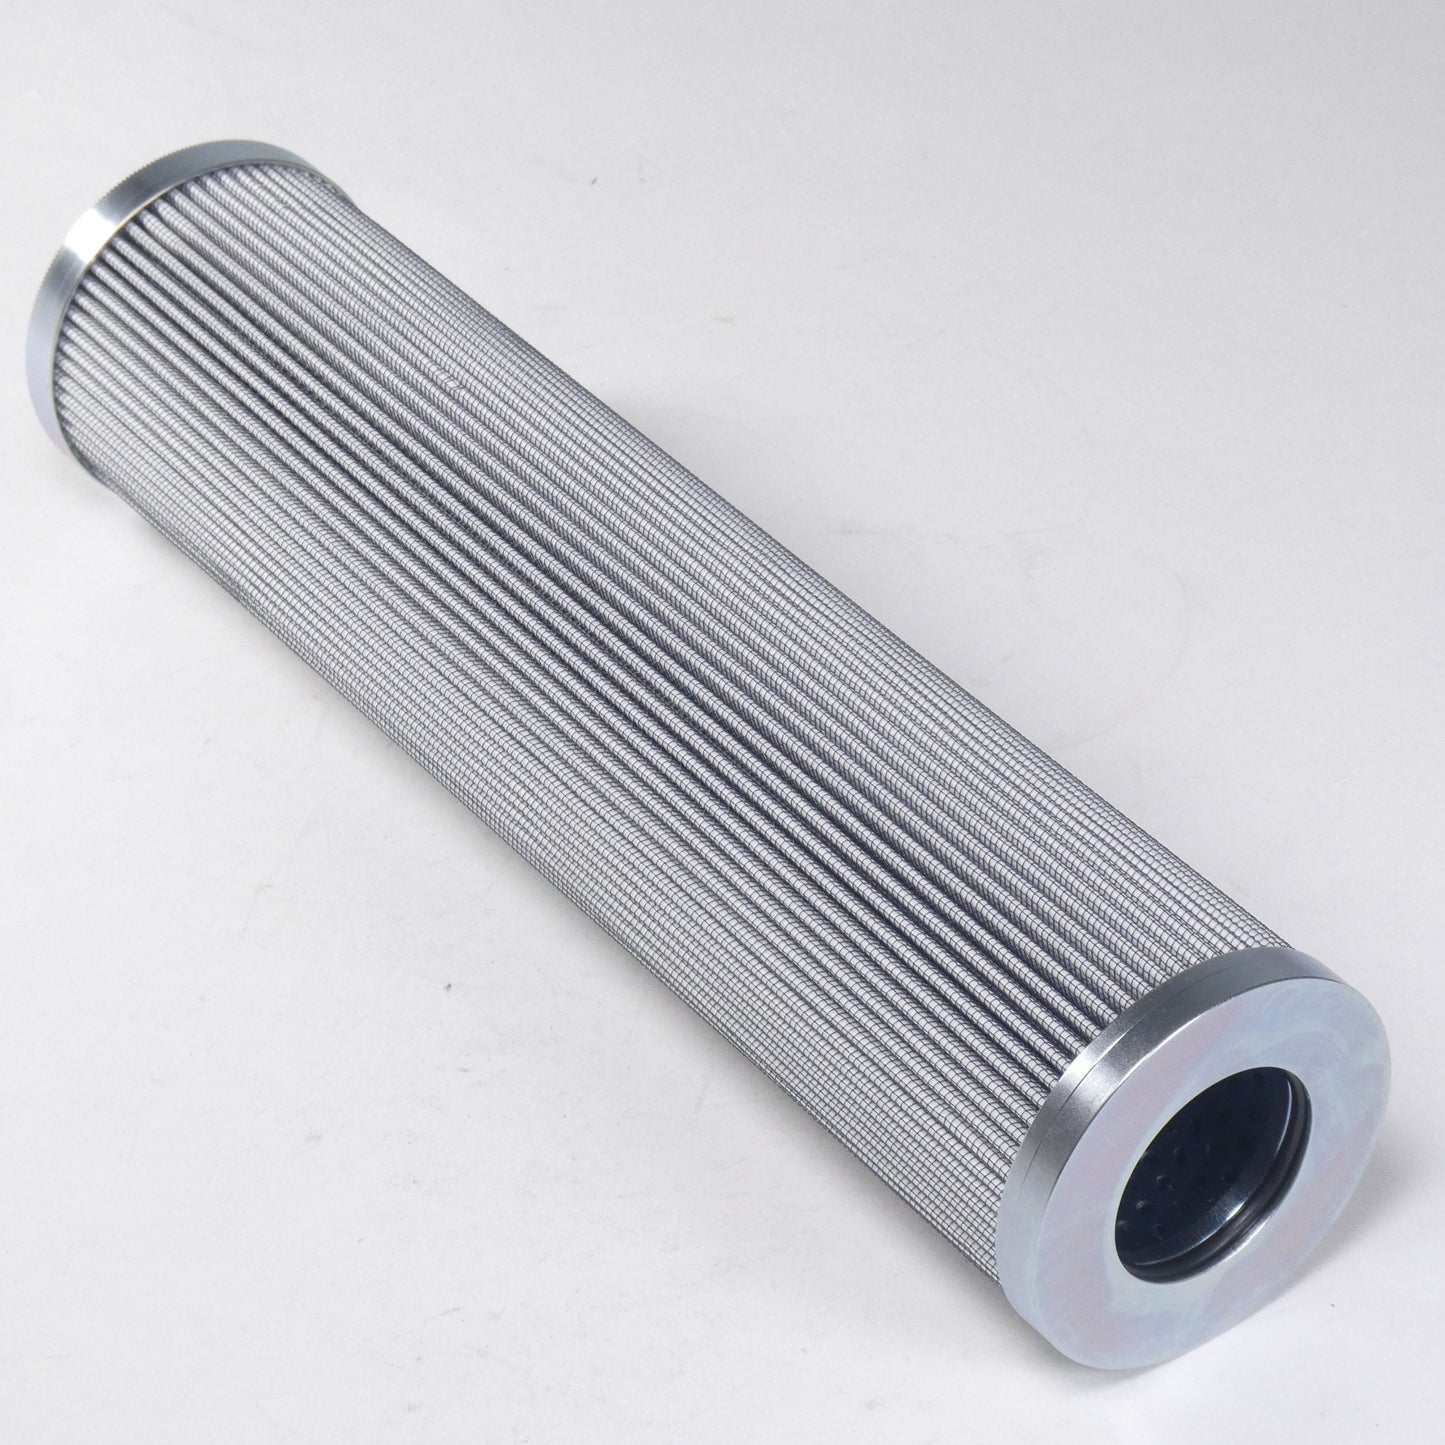 Hydrafil Replacement Filter Element for Donaldson DT-9601-13-14UM